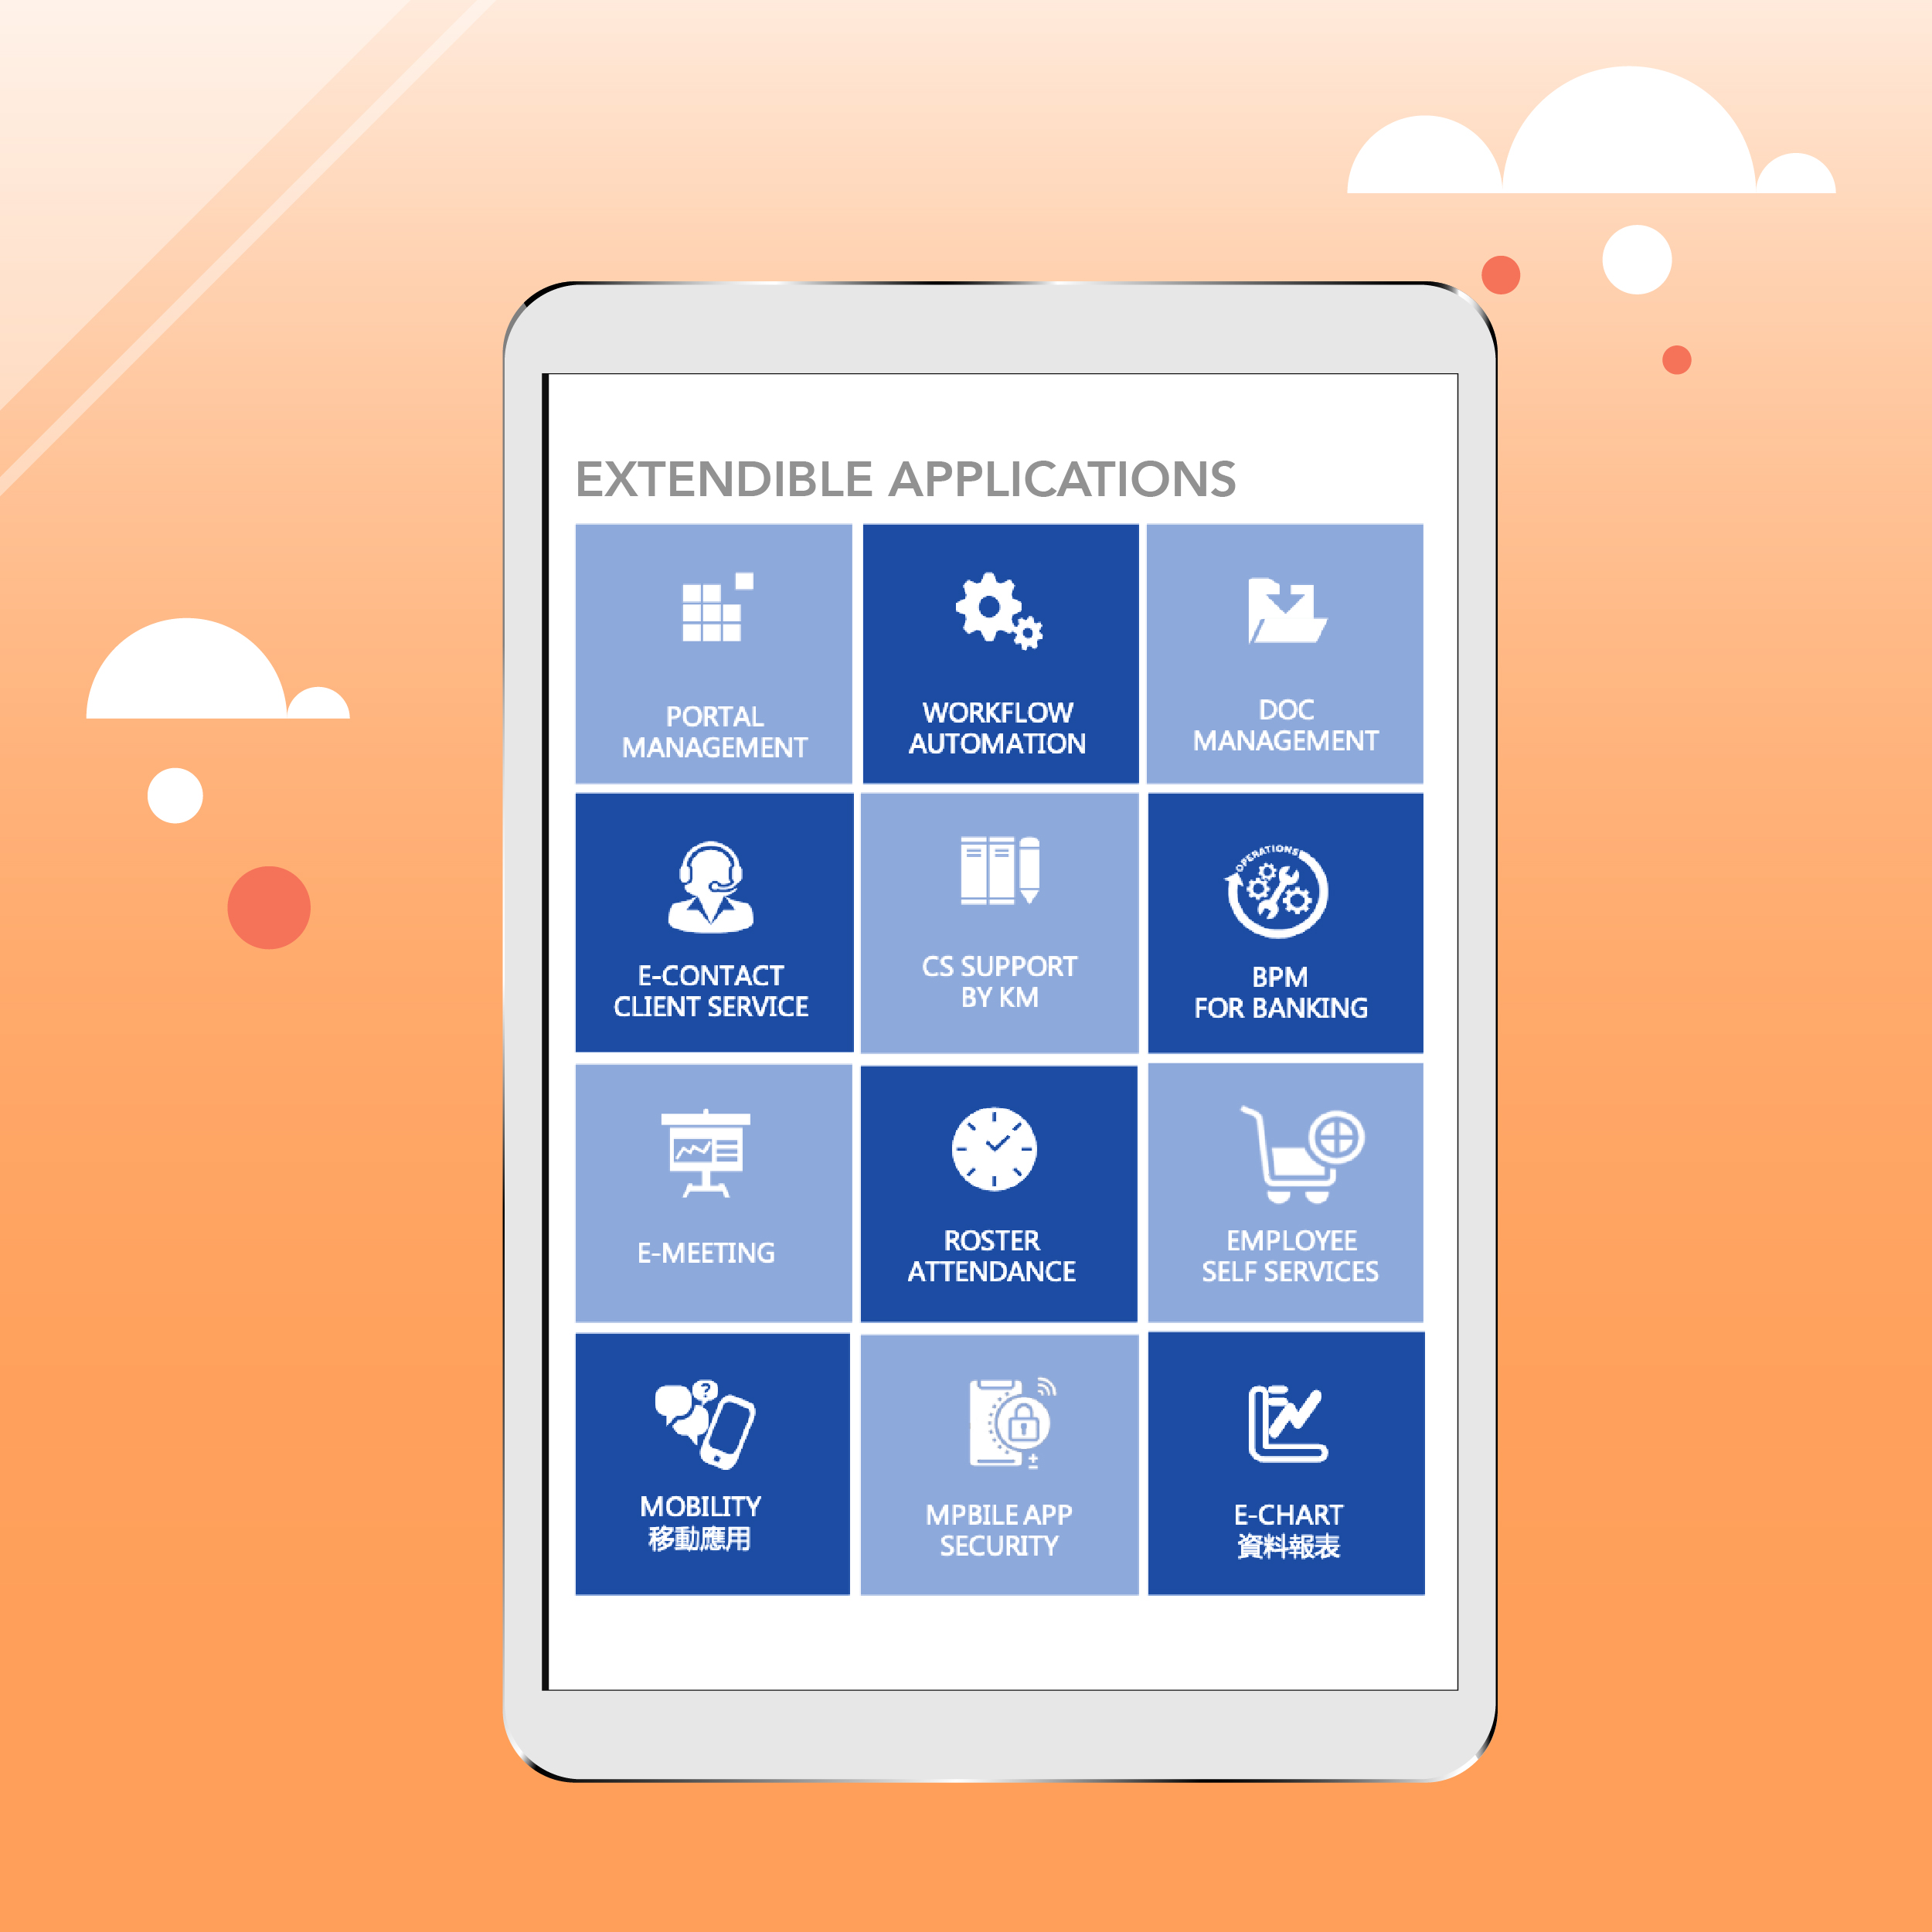 Extendible applications to empower your daily working